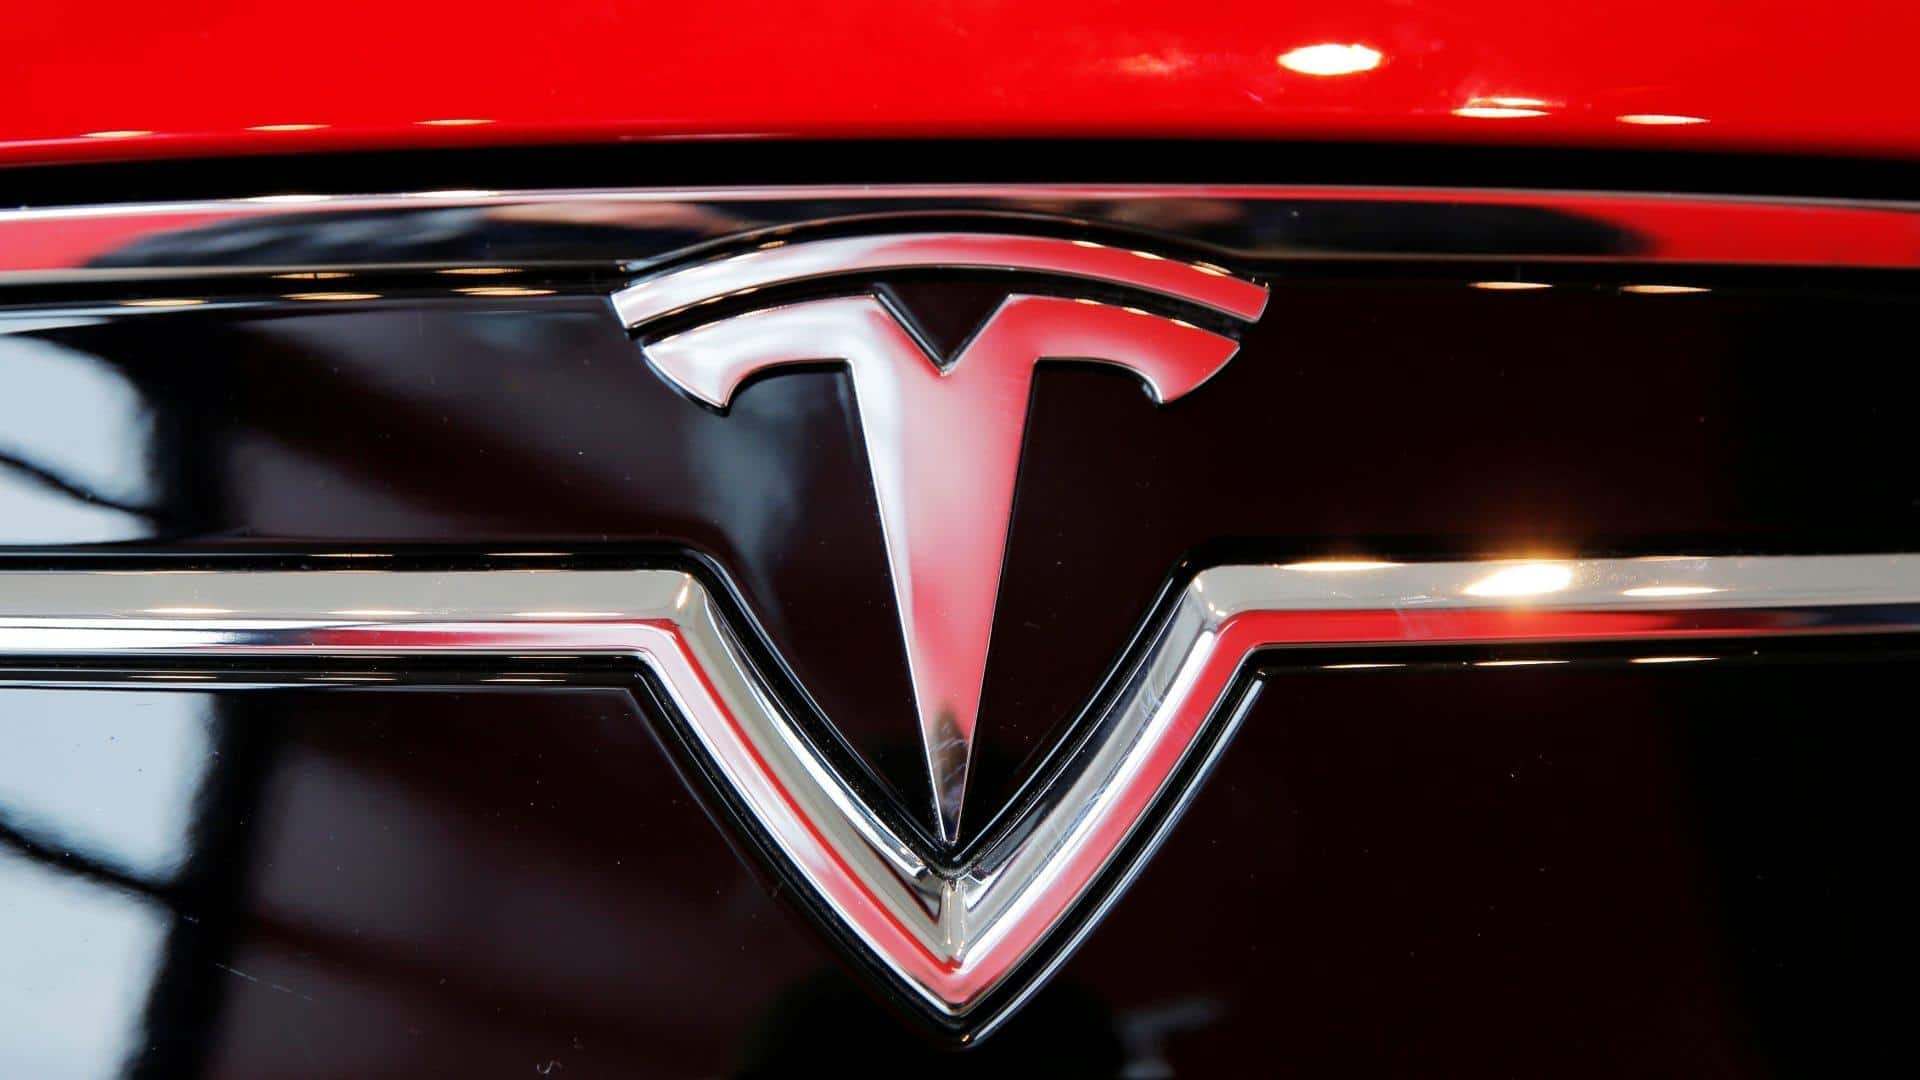 US DOJ investigating Tesla over potential securities and wire fraud